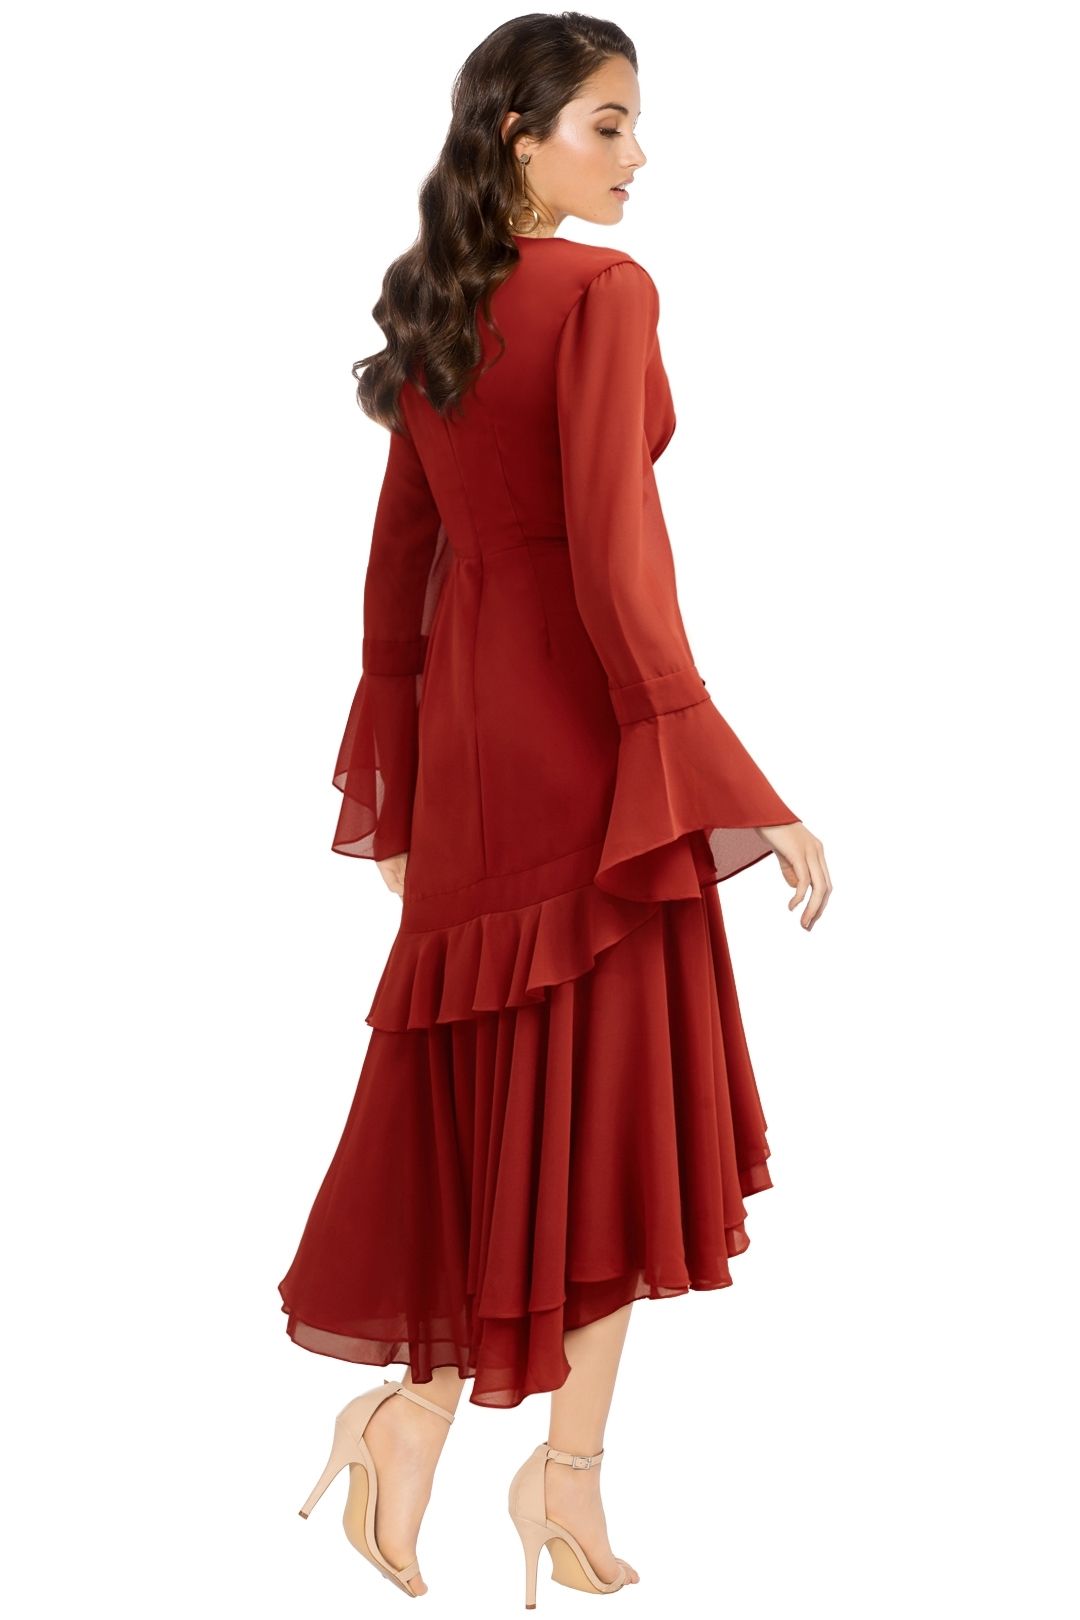 C/MEO Collective - Allude Long Sleeve Dress - Red - Back